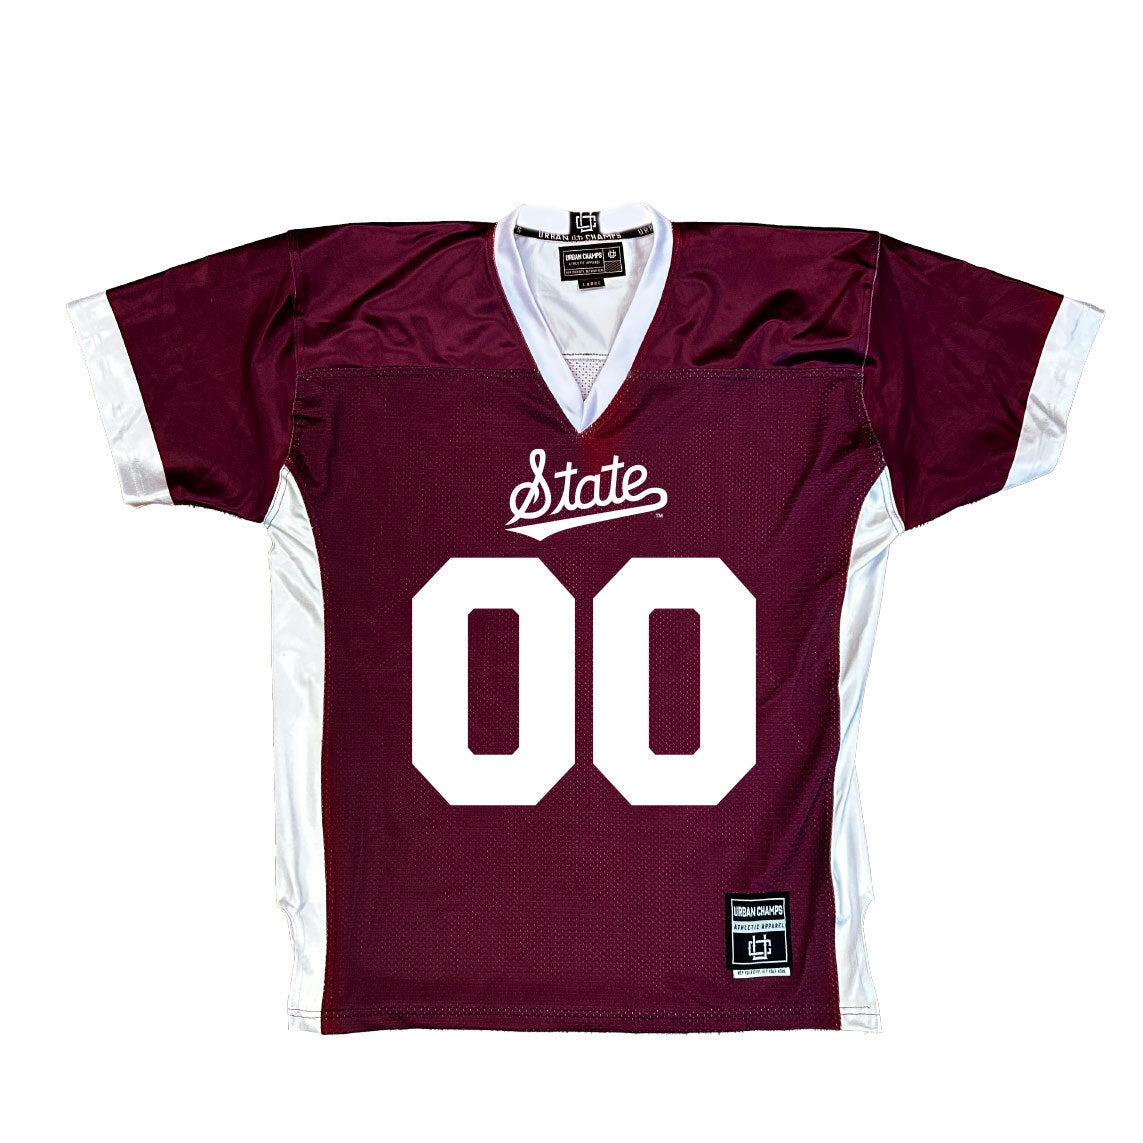 Maroon Mississippi State Football Jersey - Asher Morgan